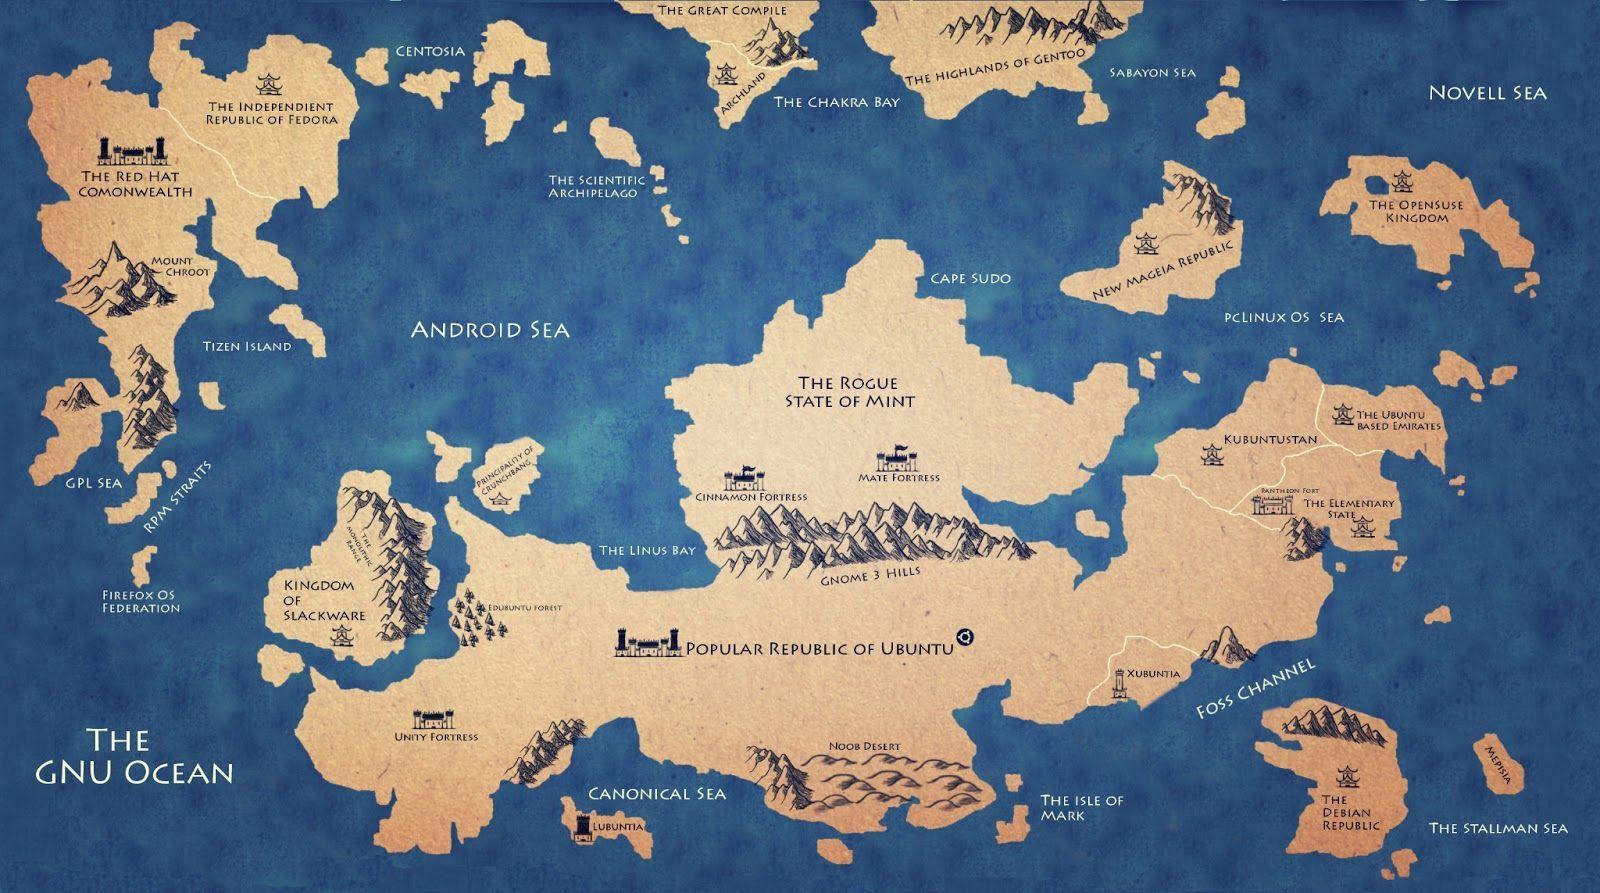 Game Of Thrones Map. Game of Thrones. Game